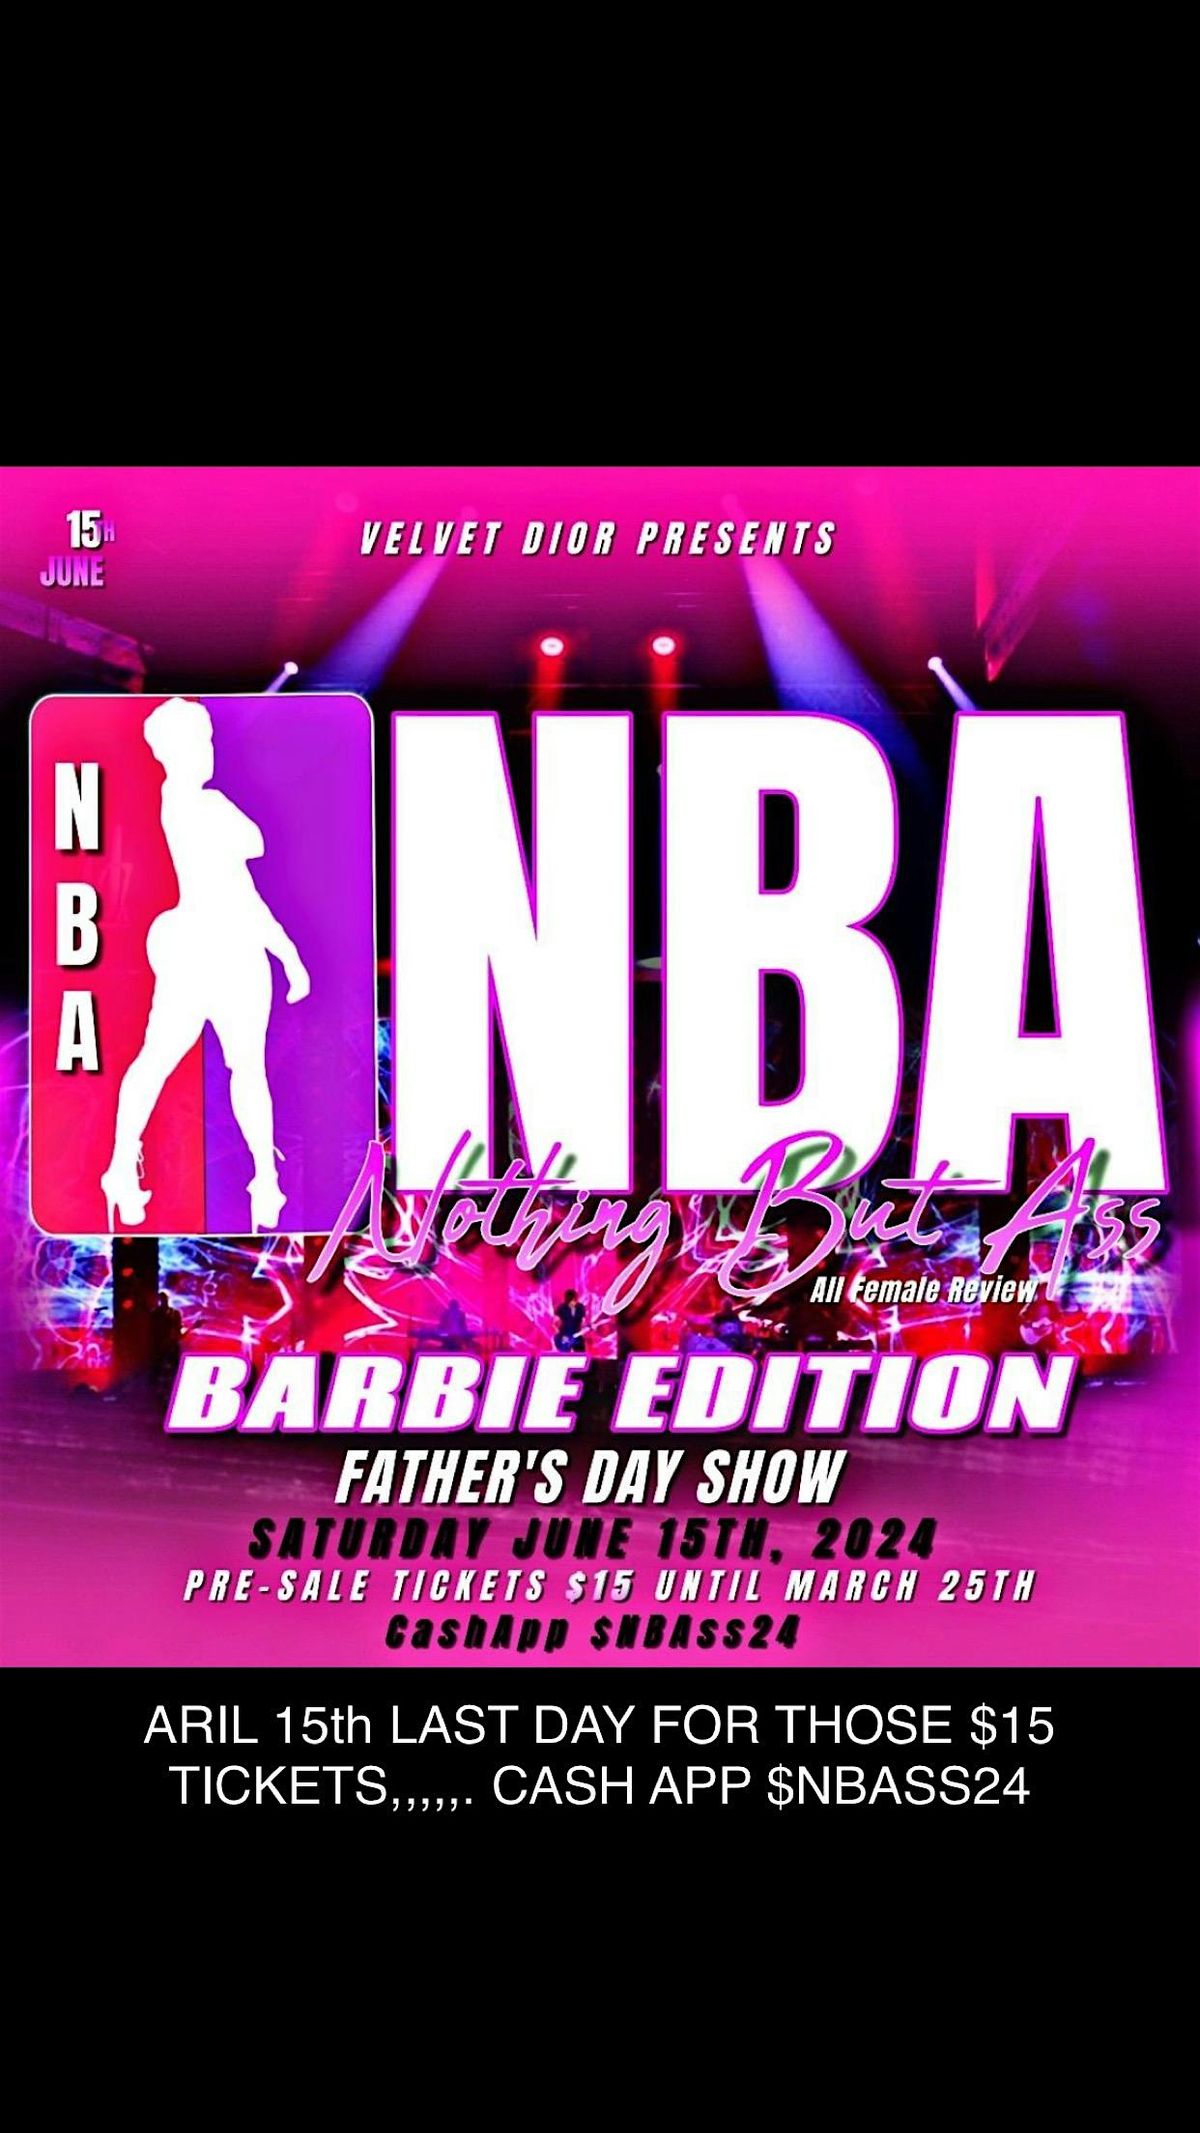 VELVET DIOR PRESENTS NBA (NOTHING BUT ASS) FATHERS DAY SHOW BARBIE EDITION